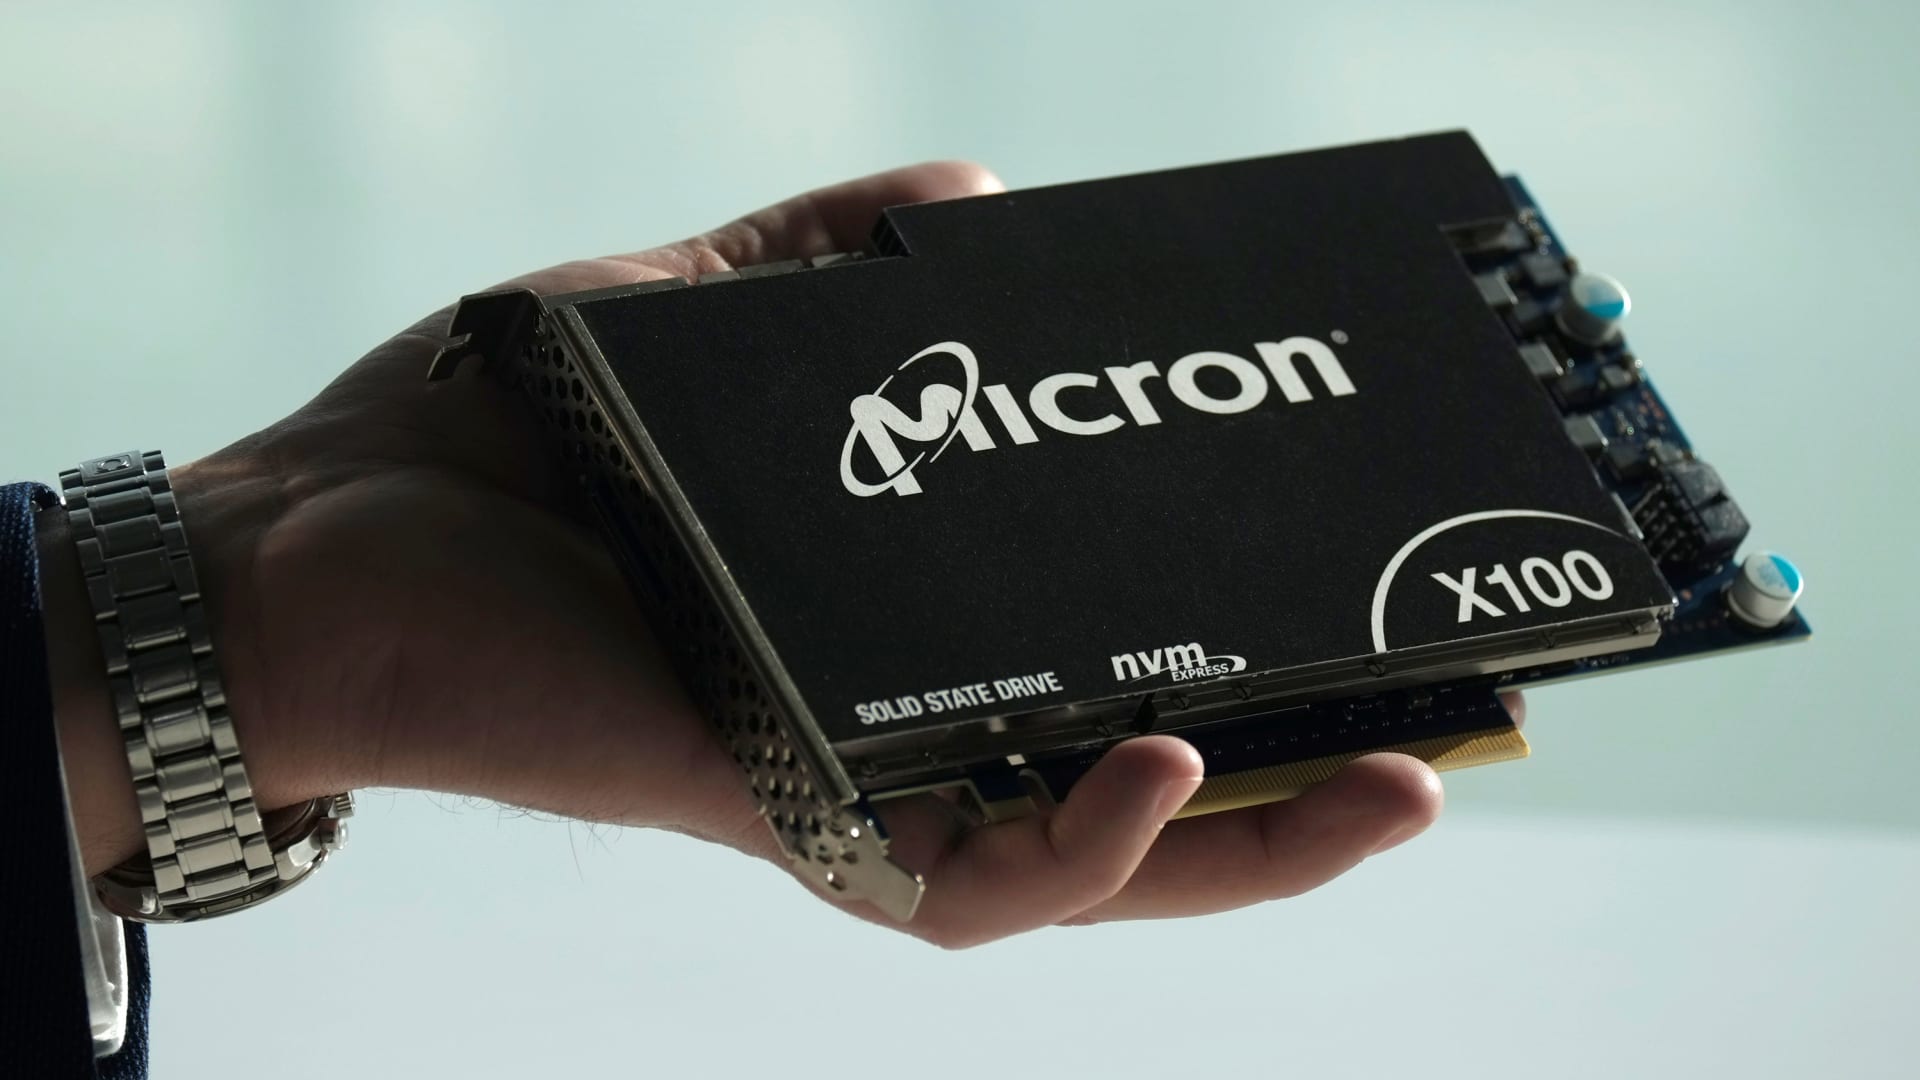 Micron Technology's hard drive for data center customers is presented at a product launch event in San Francisco, October 24, 2019.